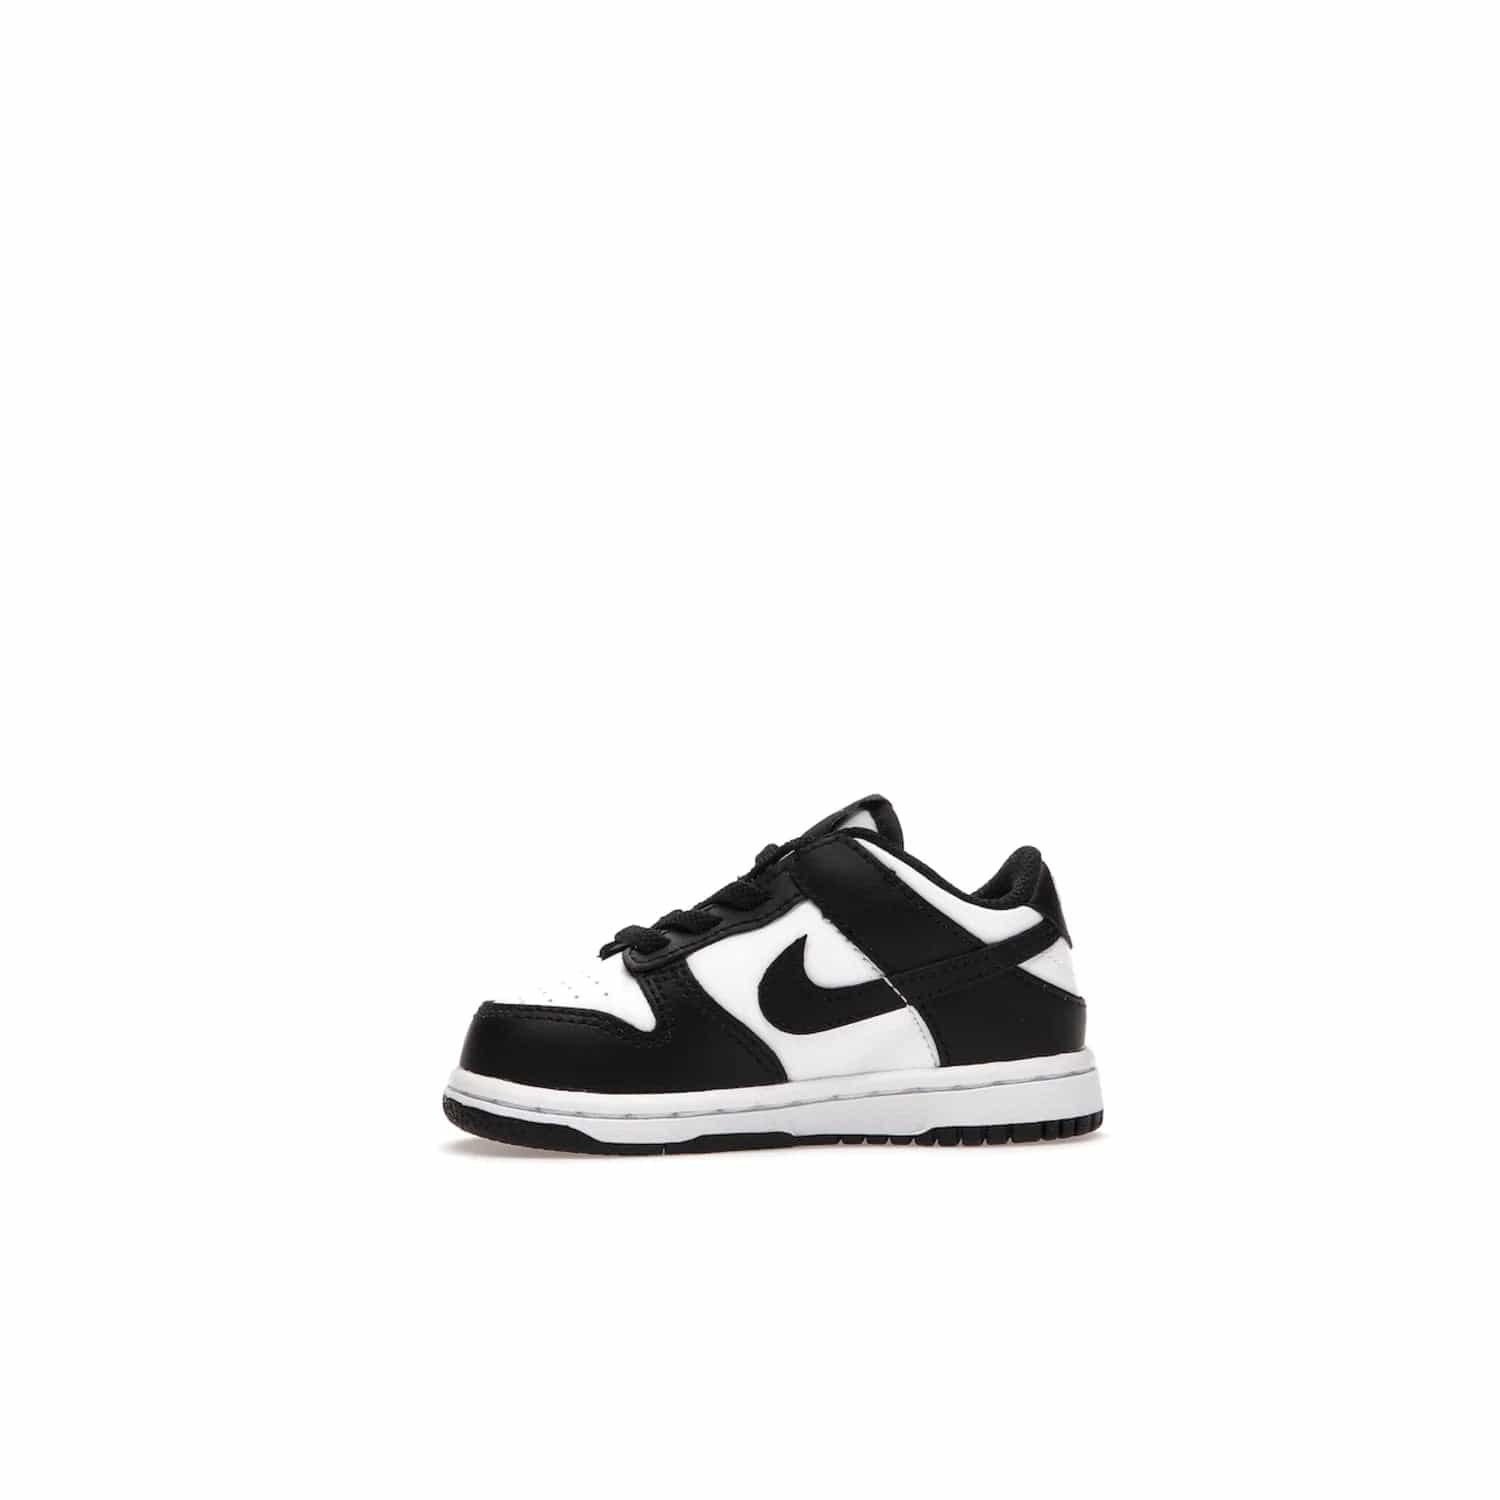 Nike Dunk Low Retro White Black Panda (2021) (TD) - Image 18 - Only at www.BallersClubKickz.com - The perfect blend of classic style and modern style, the Nike Dunk Low Retro White Black (TD) toddler shoe has a soft leather upper, white midsole, and black outsole. Signature Swoosh branding and lightly padded tongue give it timeless Nike style. Released in March 2021.